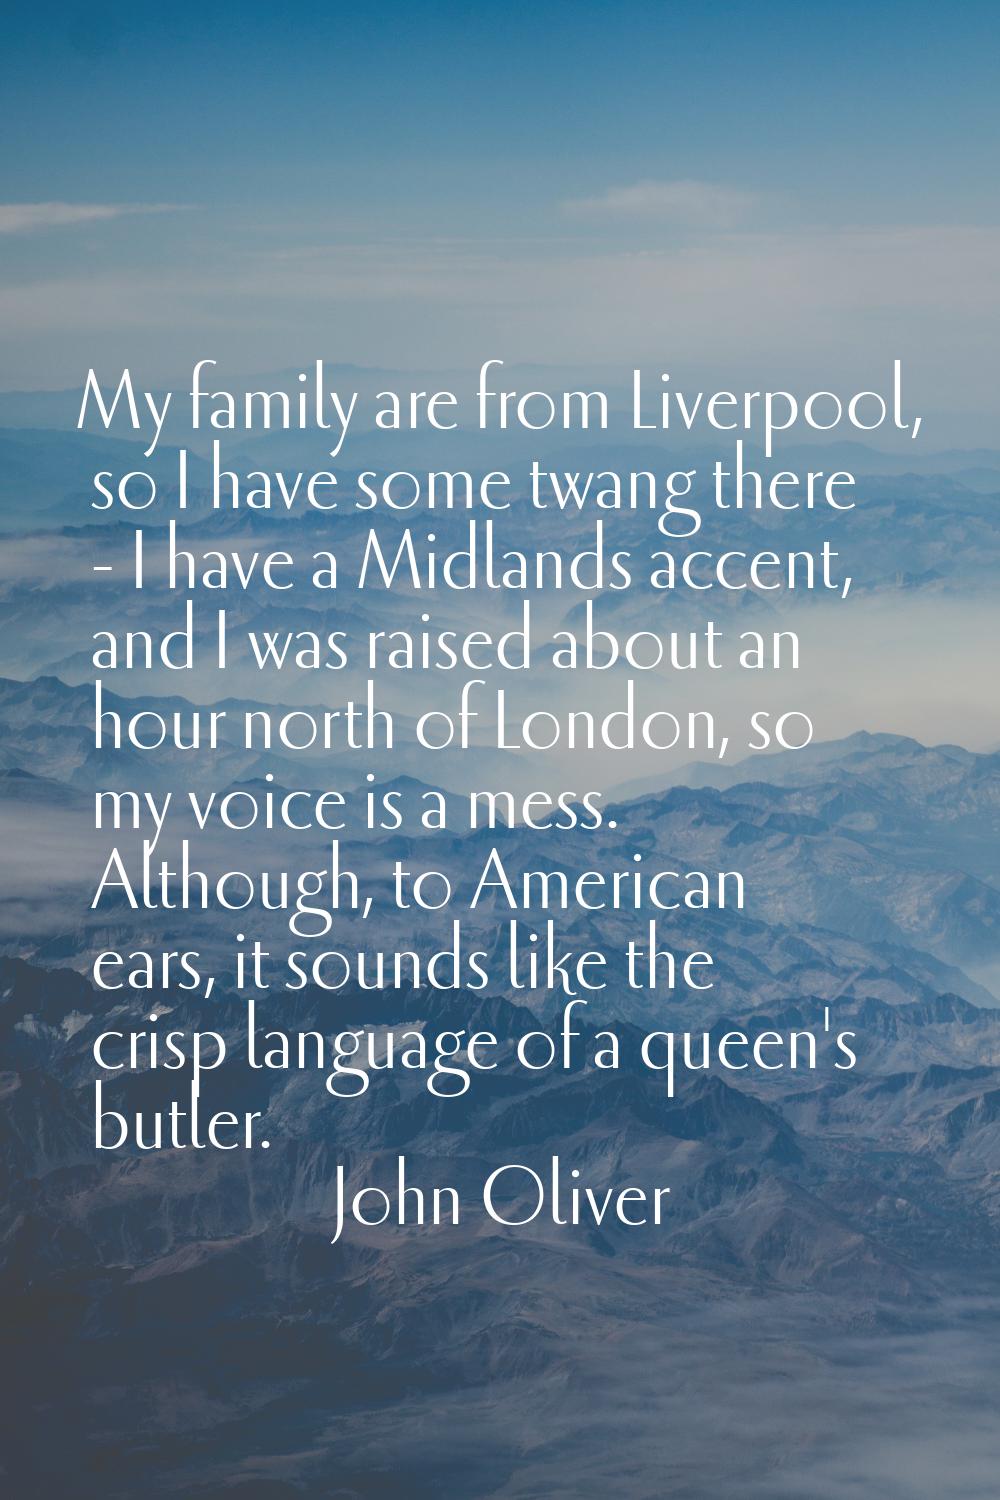 My family are from Liverpool, so I have some twang there - I have a Midlands accent, and I was rais